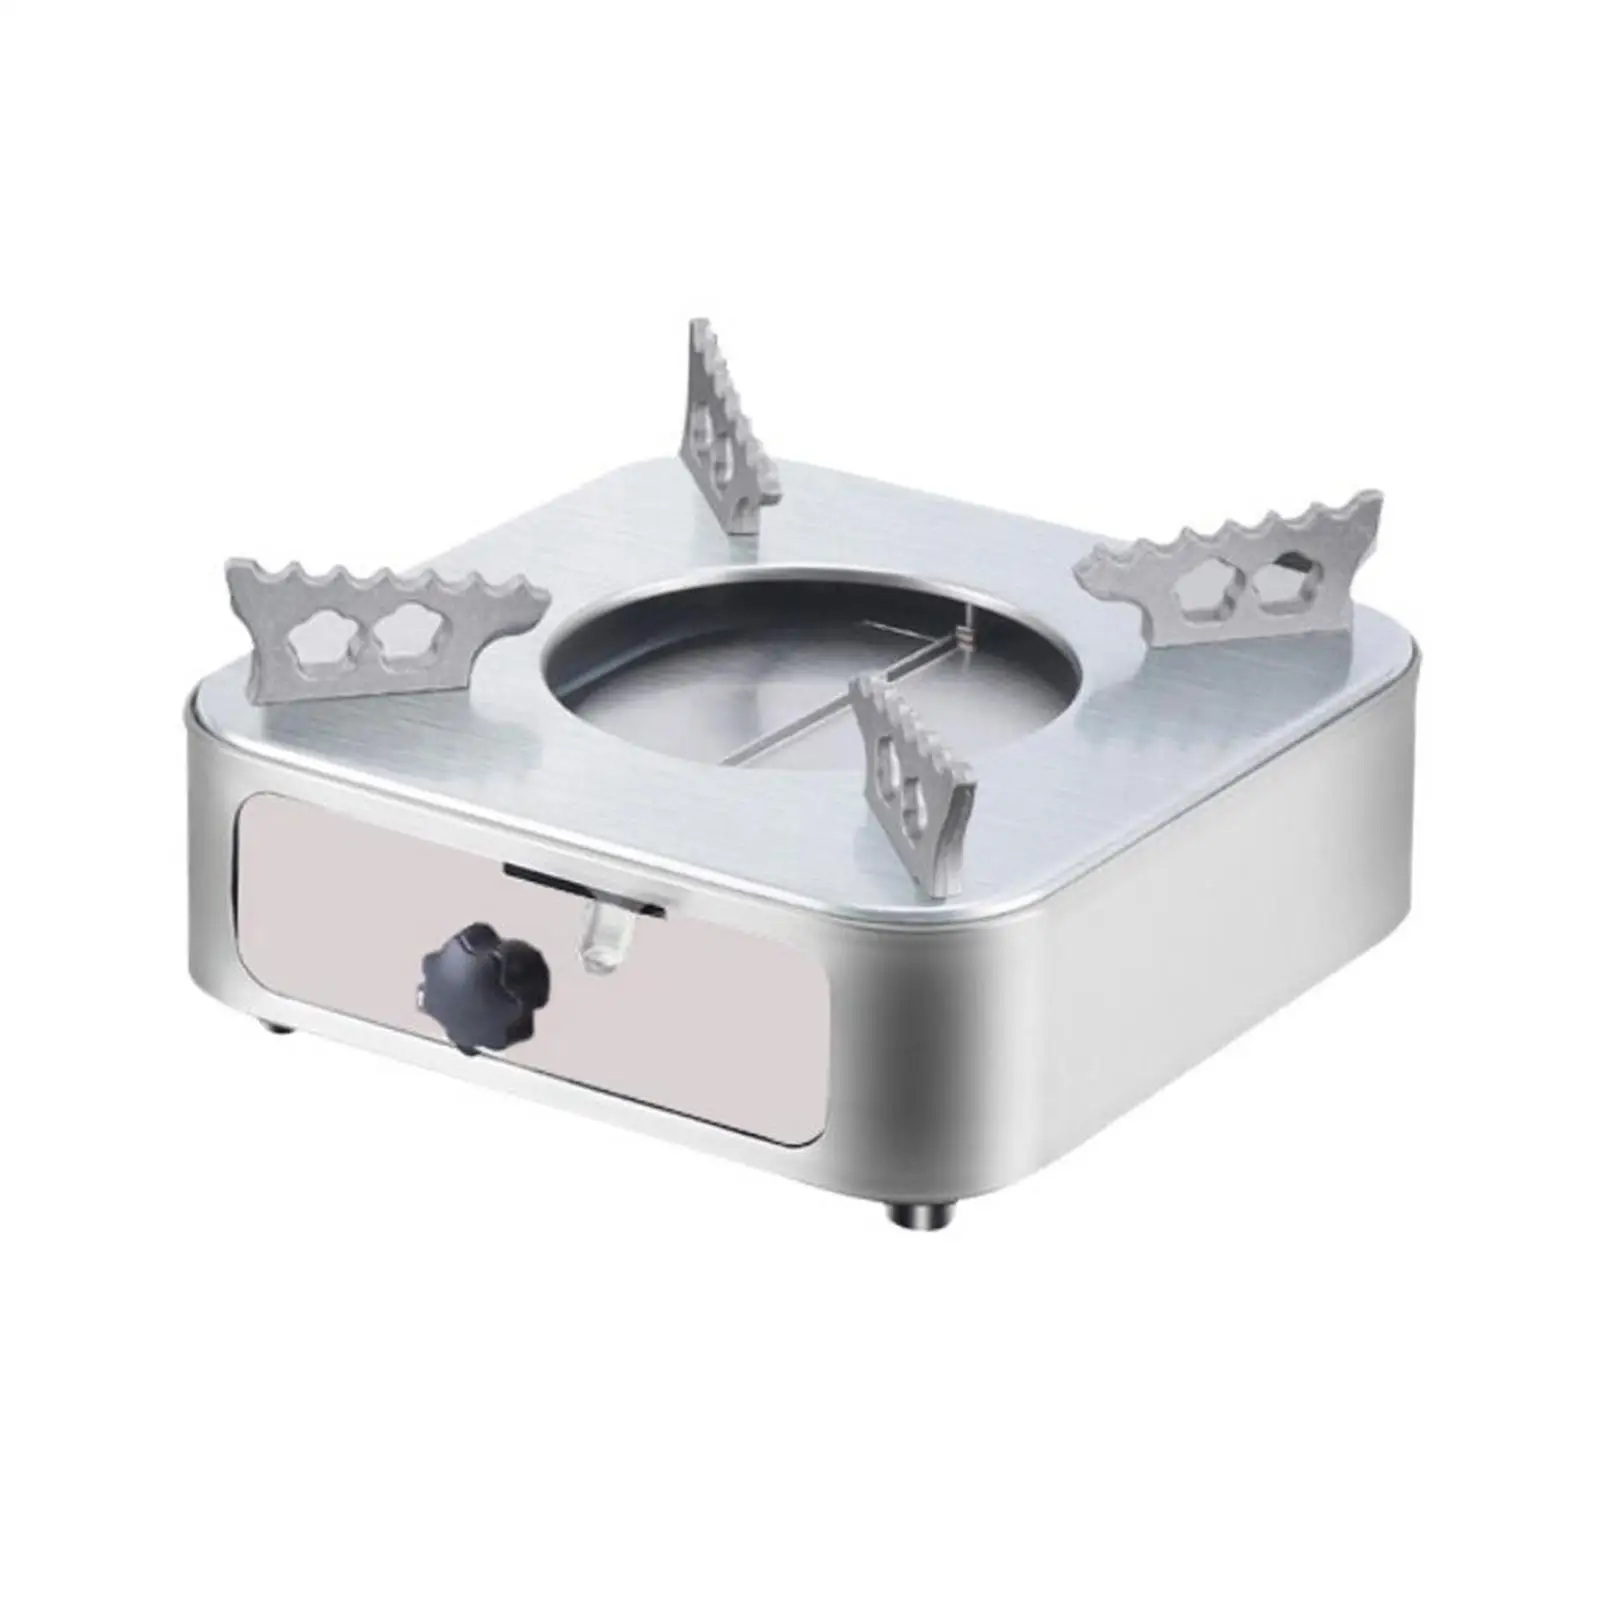 Mini Alcohol Stove Sturdy Kitchen Equipment Lightweight Burner Drawer Type Spirit Burner for Cooking Outdoor Picnic BBQ Camping